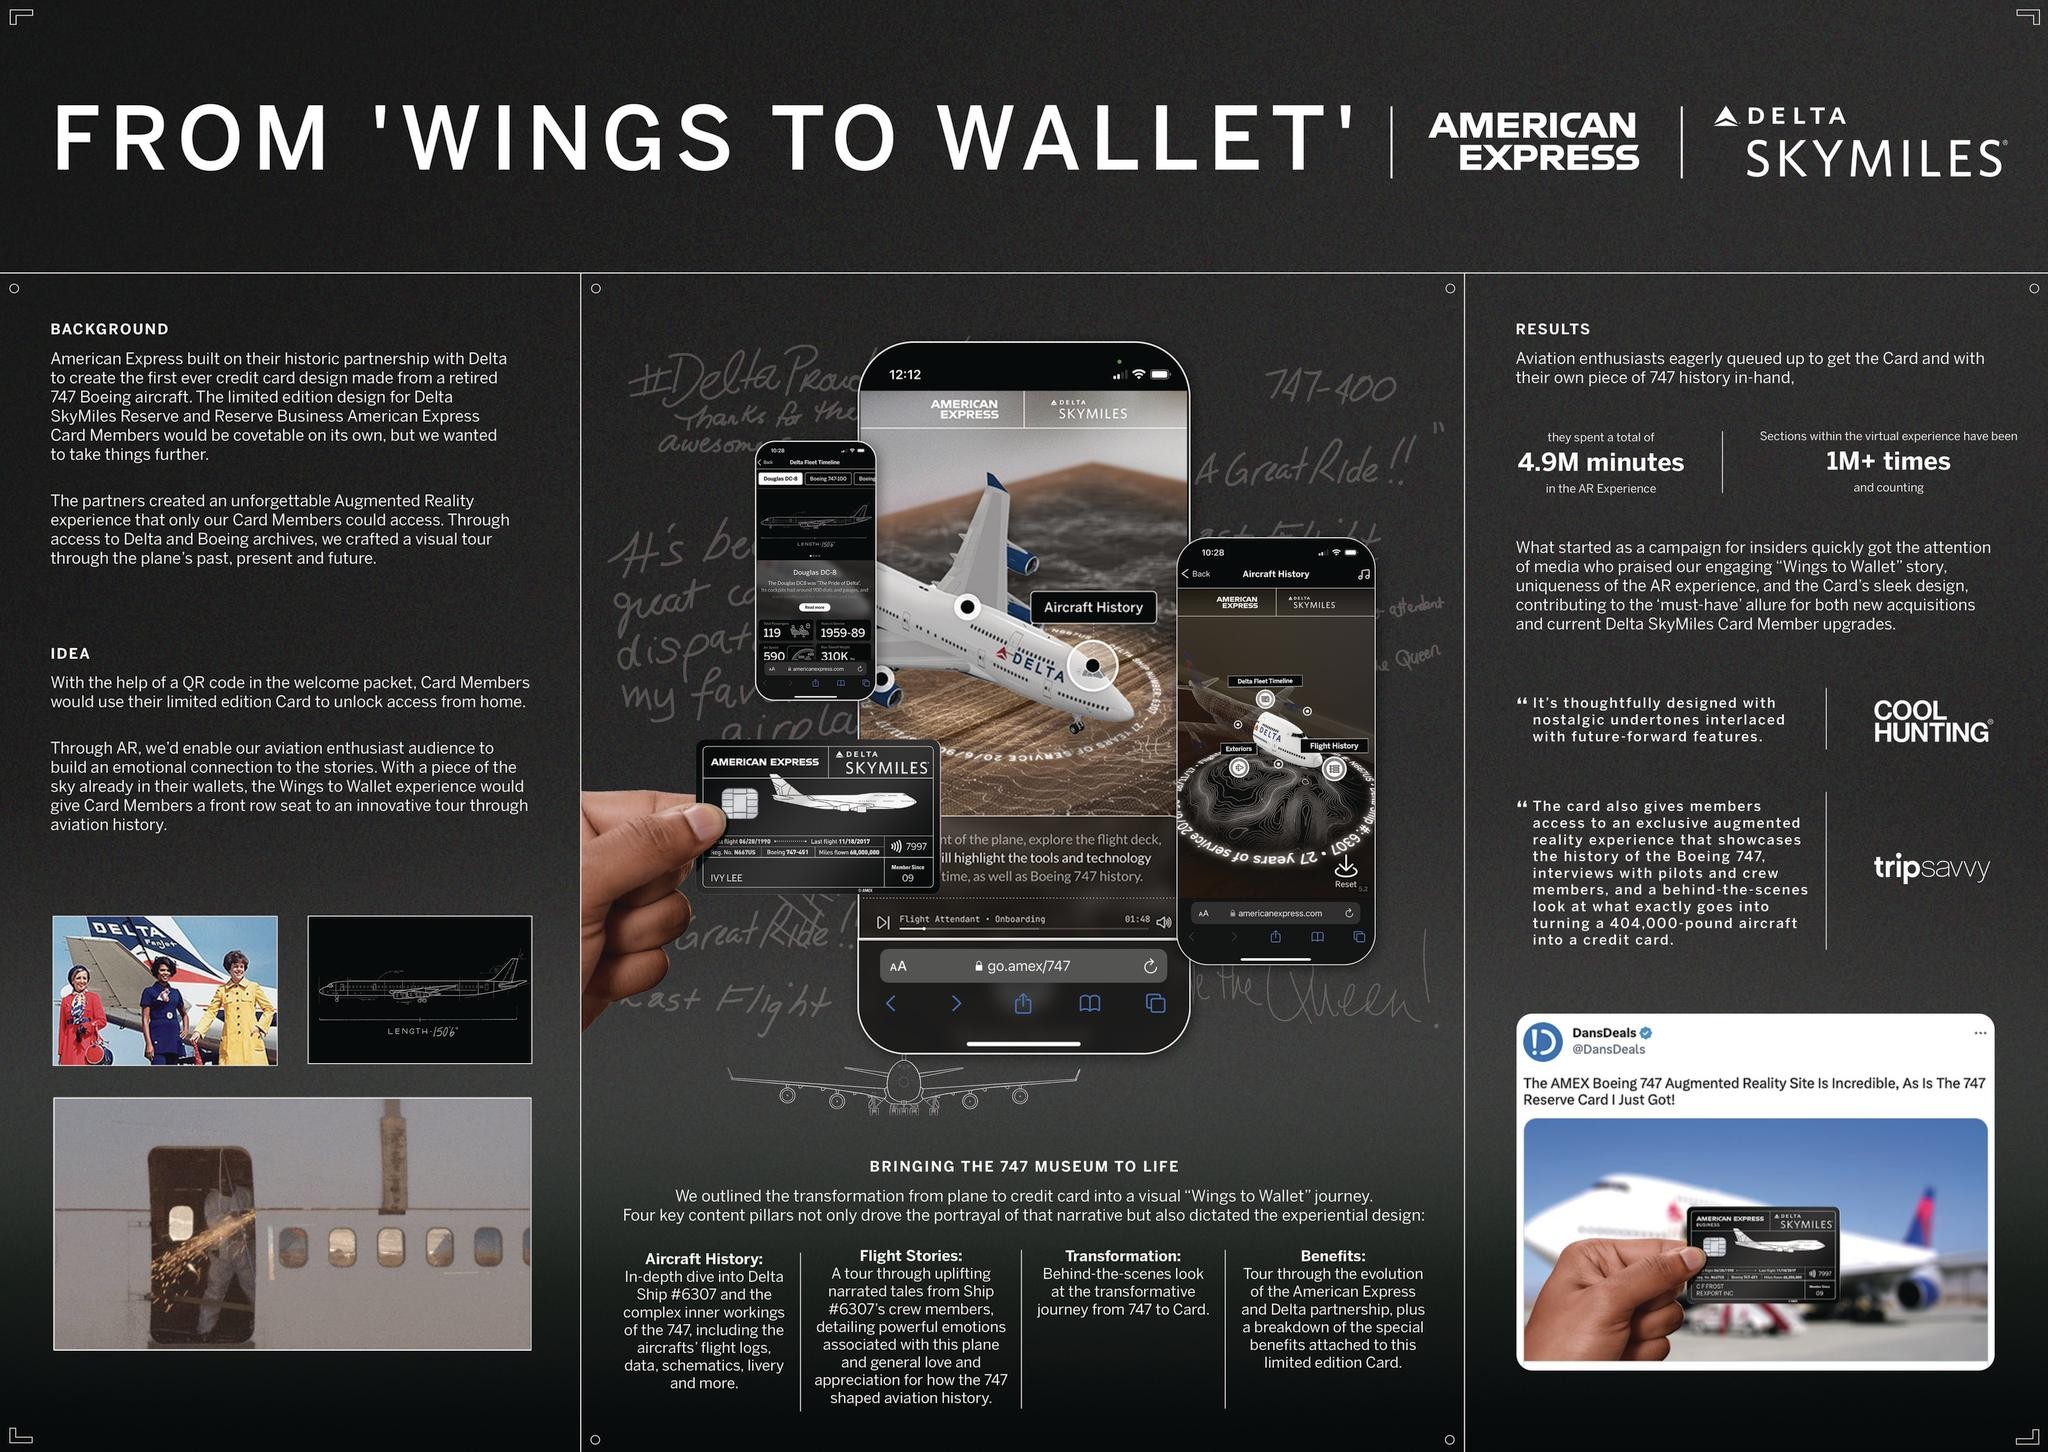 From ‘Wings to Wallet’ with American Express & Delta